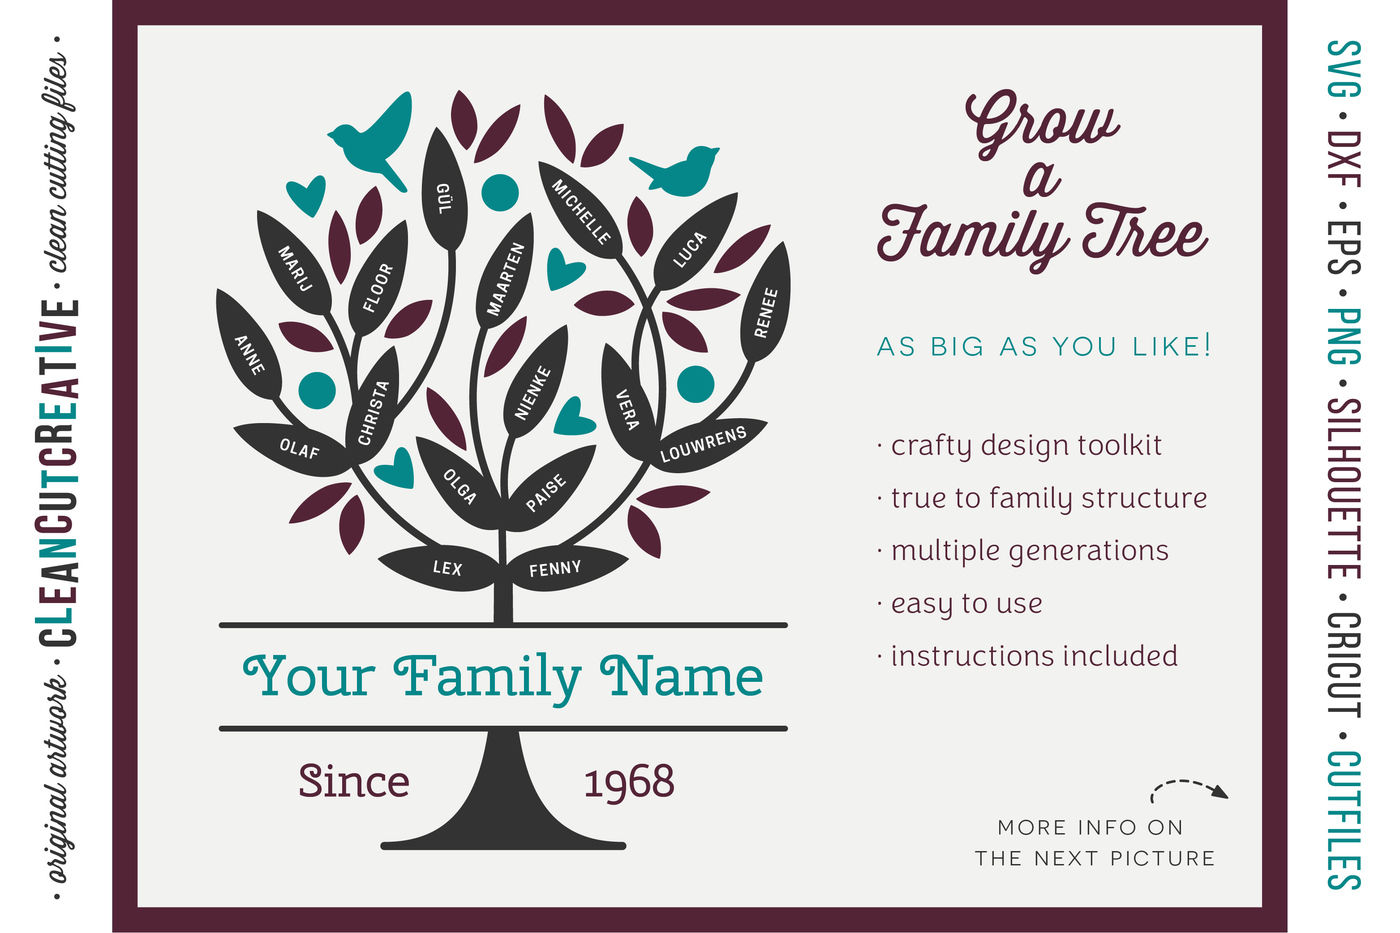 Download Grow a FAMILY TREE! - crafty design toolkit - SVG DXF EPS PNG By CleanCutCreative ...